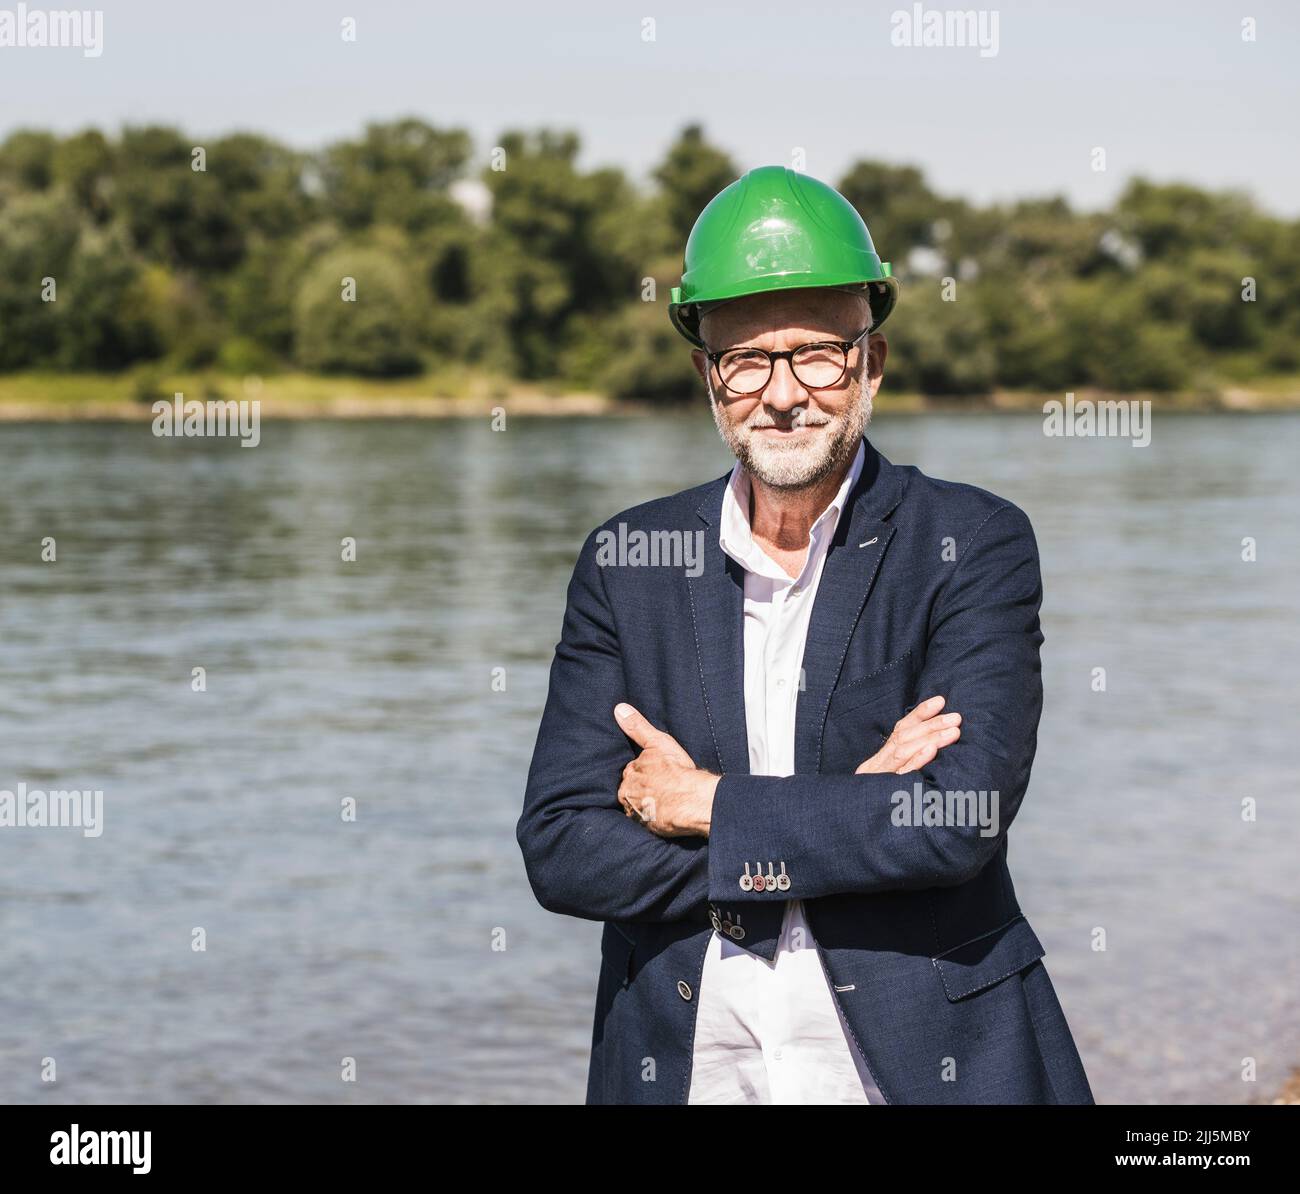 Smiling senior engineer wearing green hardhat standing with arms crossed at riverbank on sunny day Stock Photo